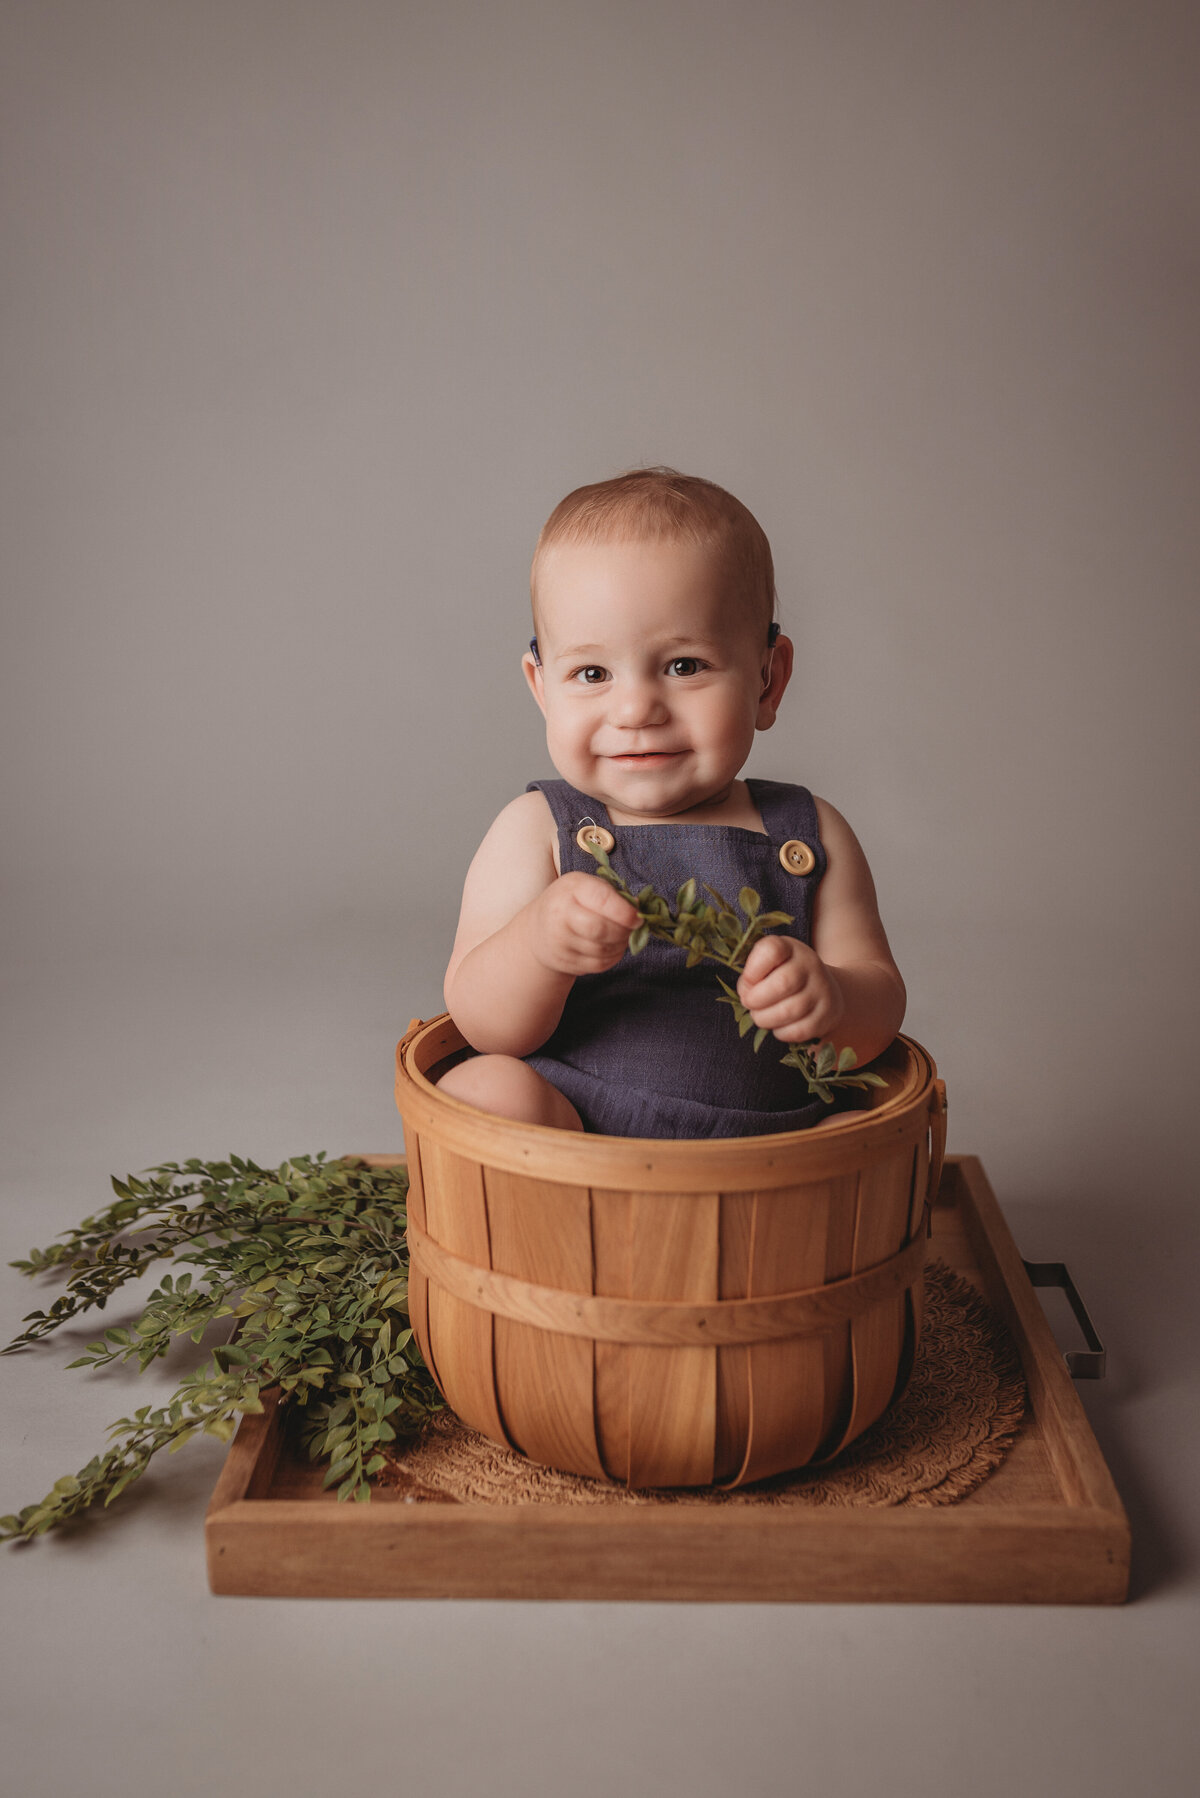 One year old baby boy sitting in a basket smiling, wearing a dark blue jumper on light gray backdrop